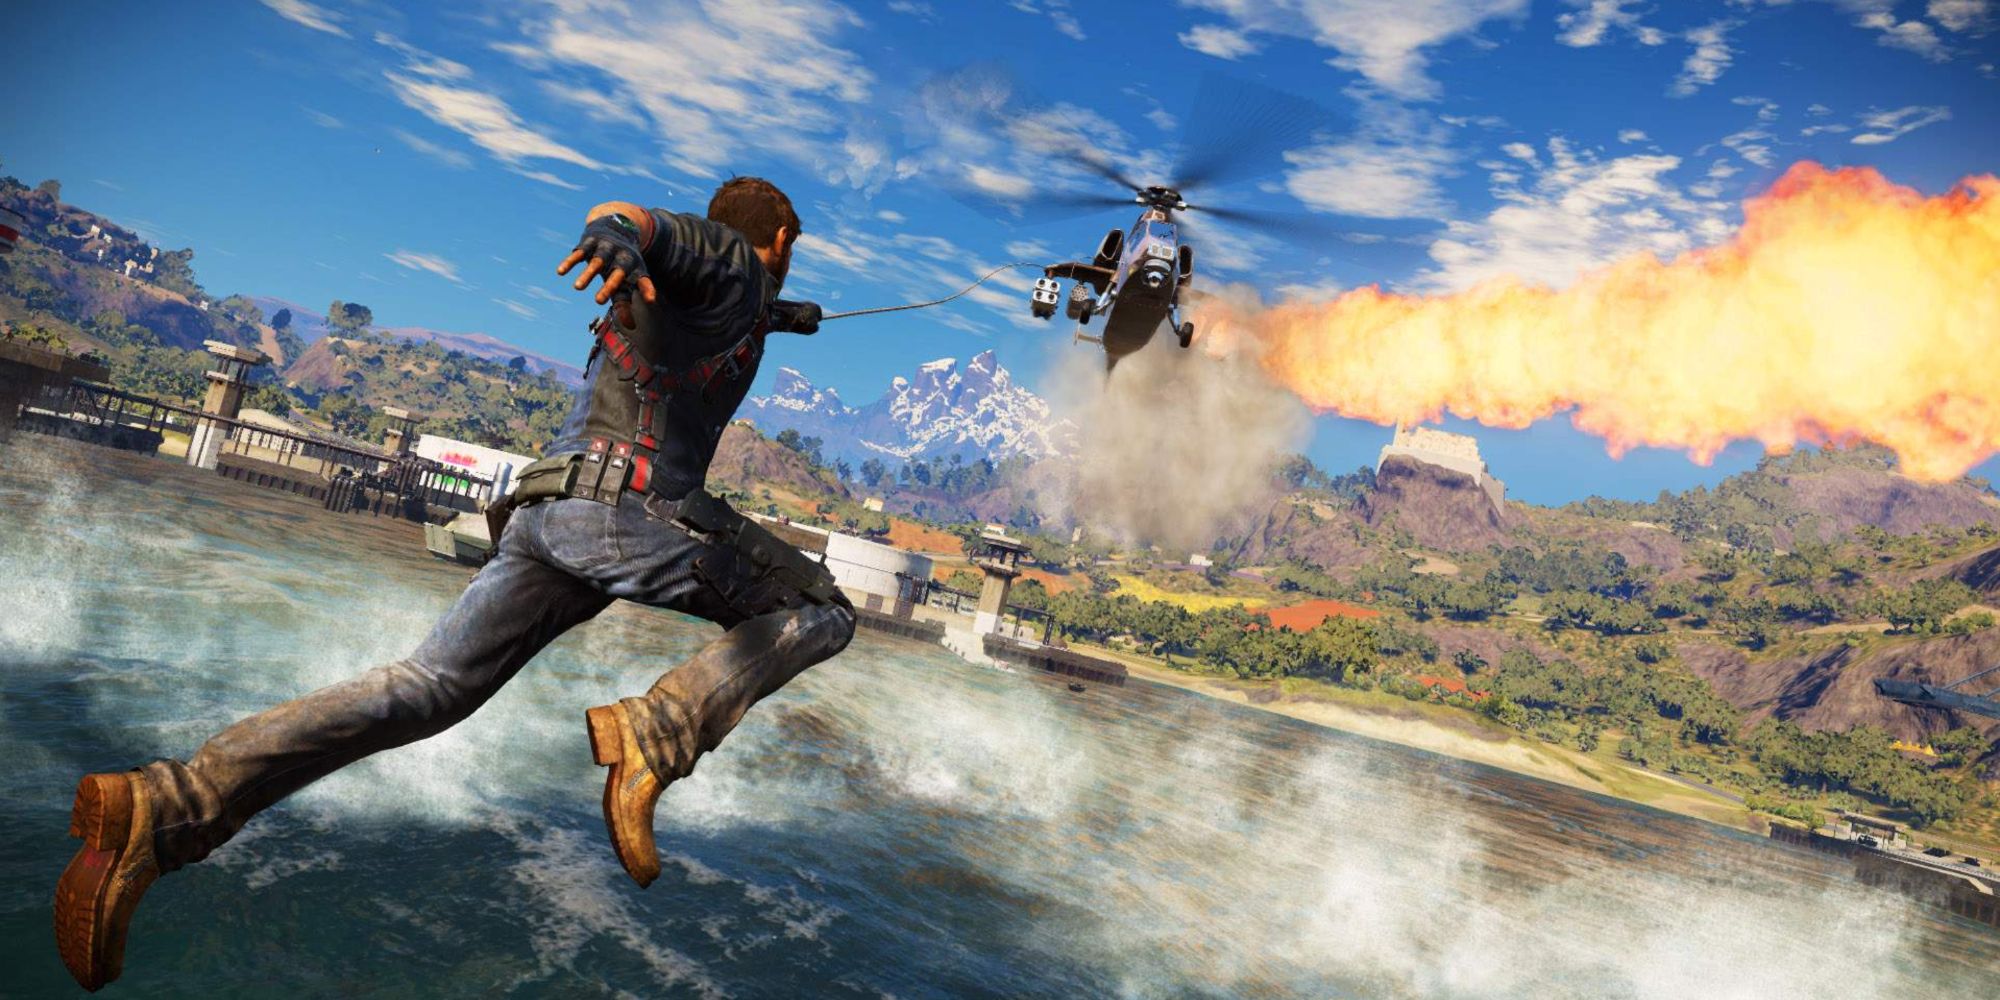 Rico grappling onto a helicopter in Just Cause 3